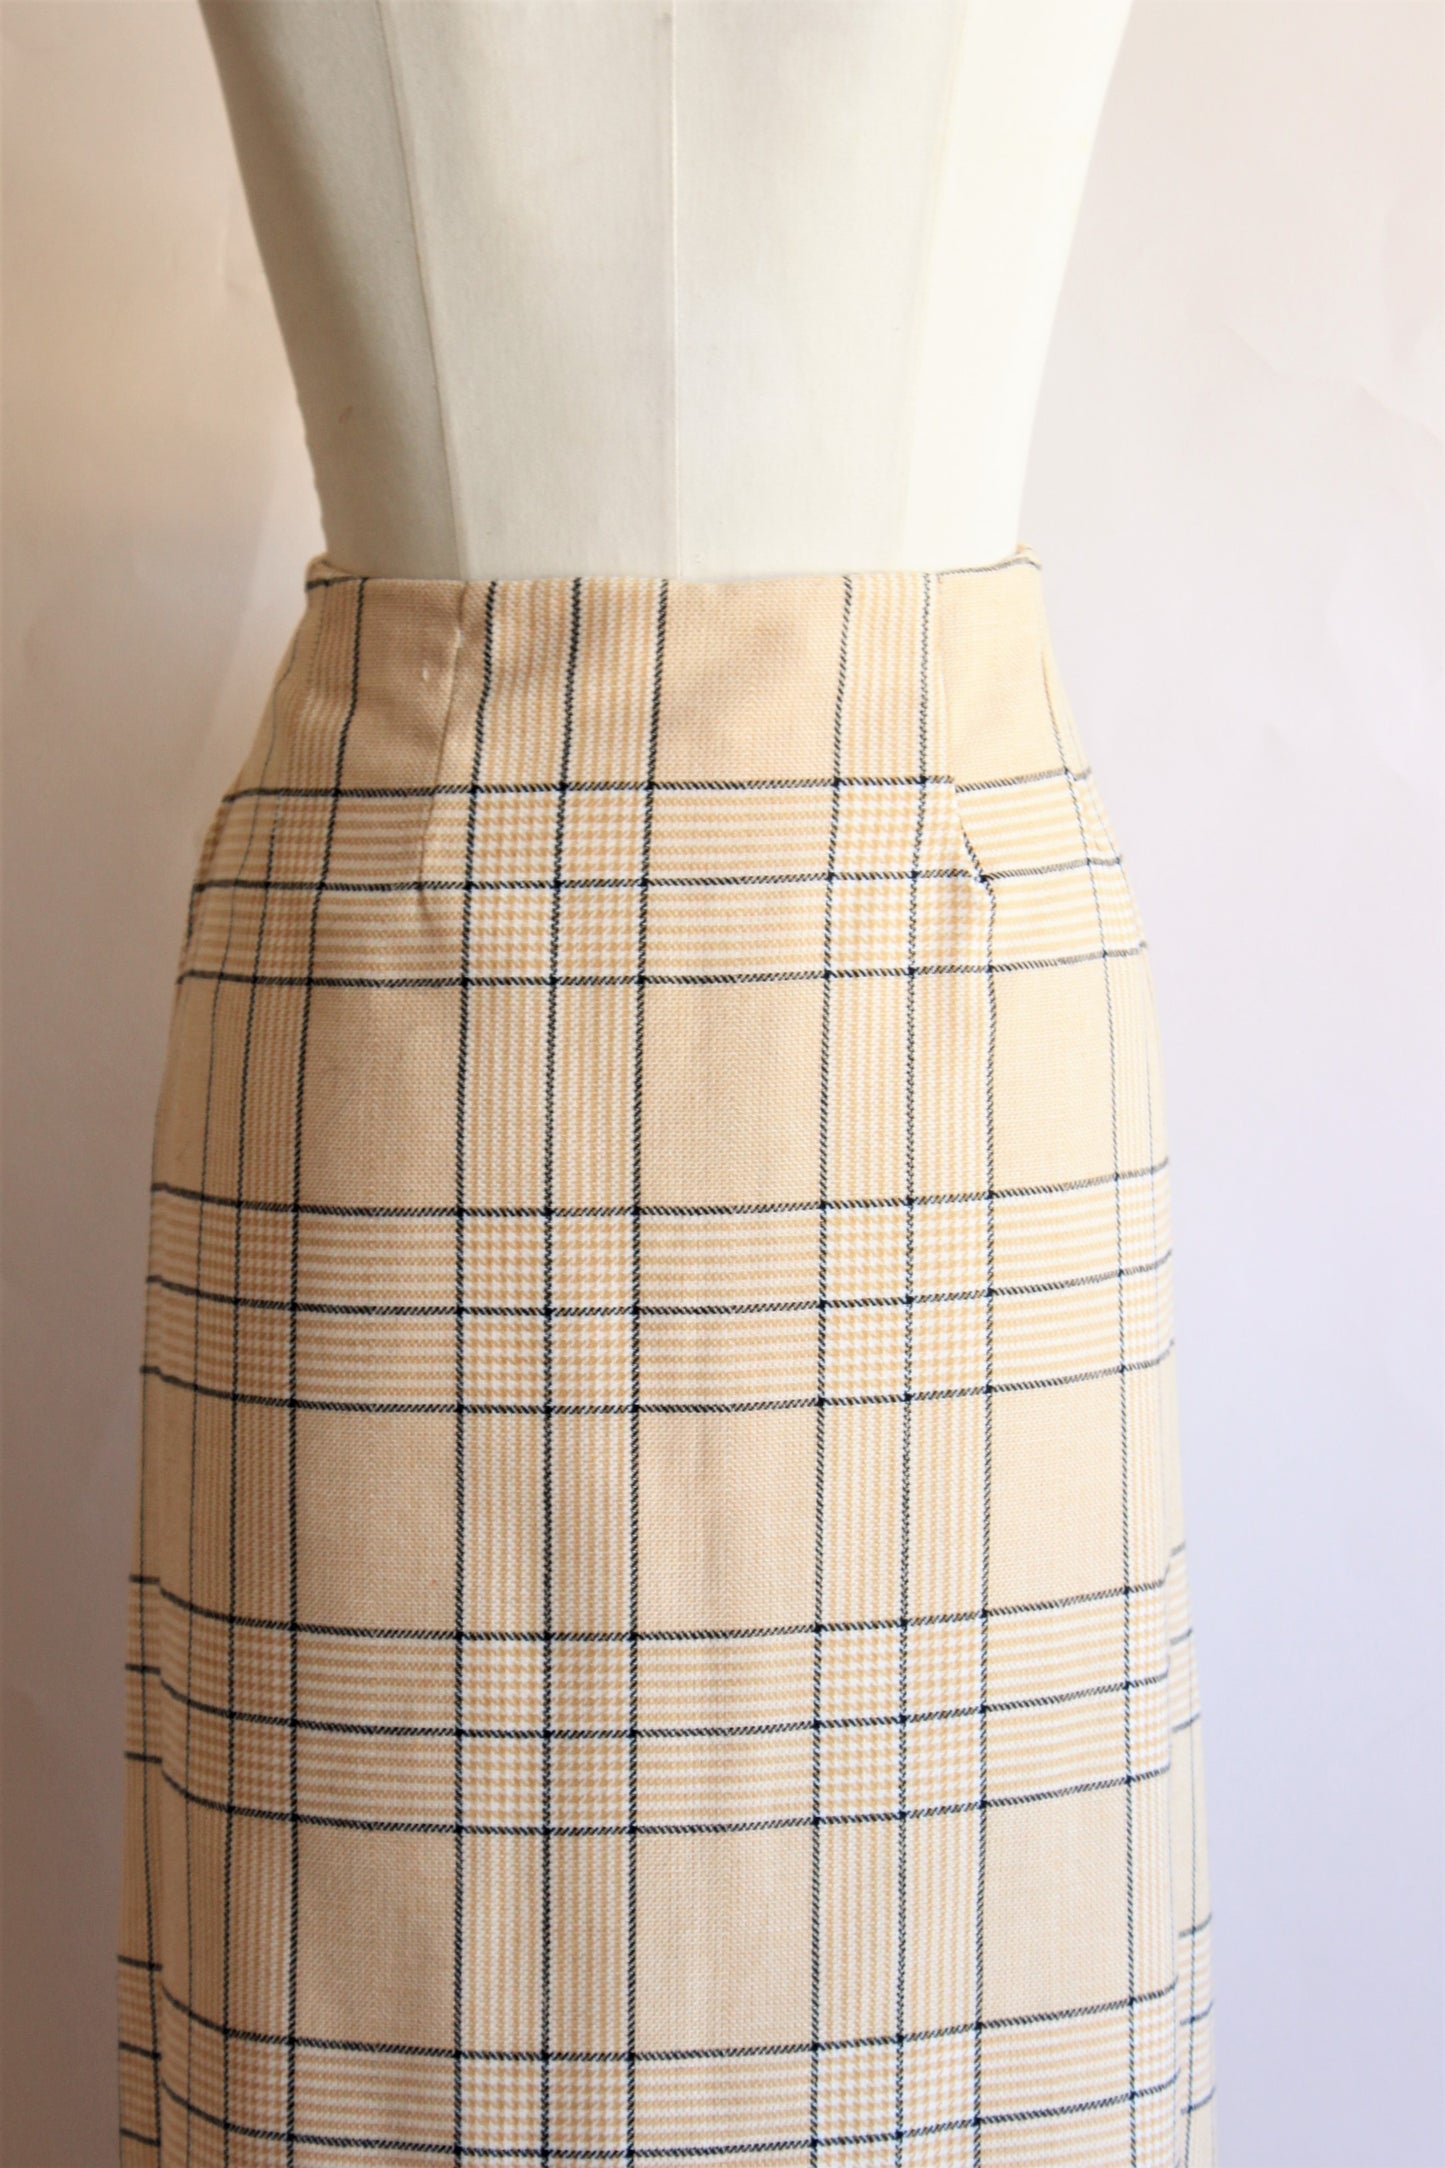 Vintage Maxiskirt in a Burberry-like plaid.